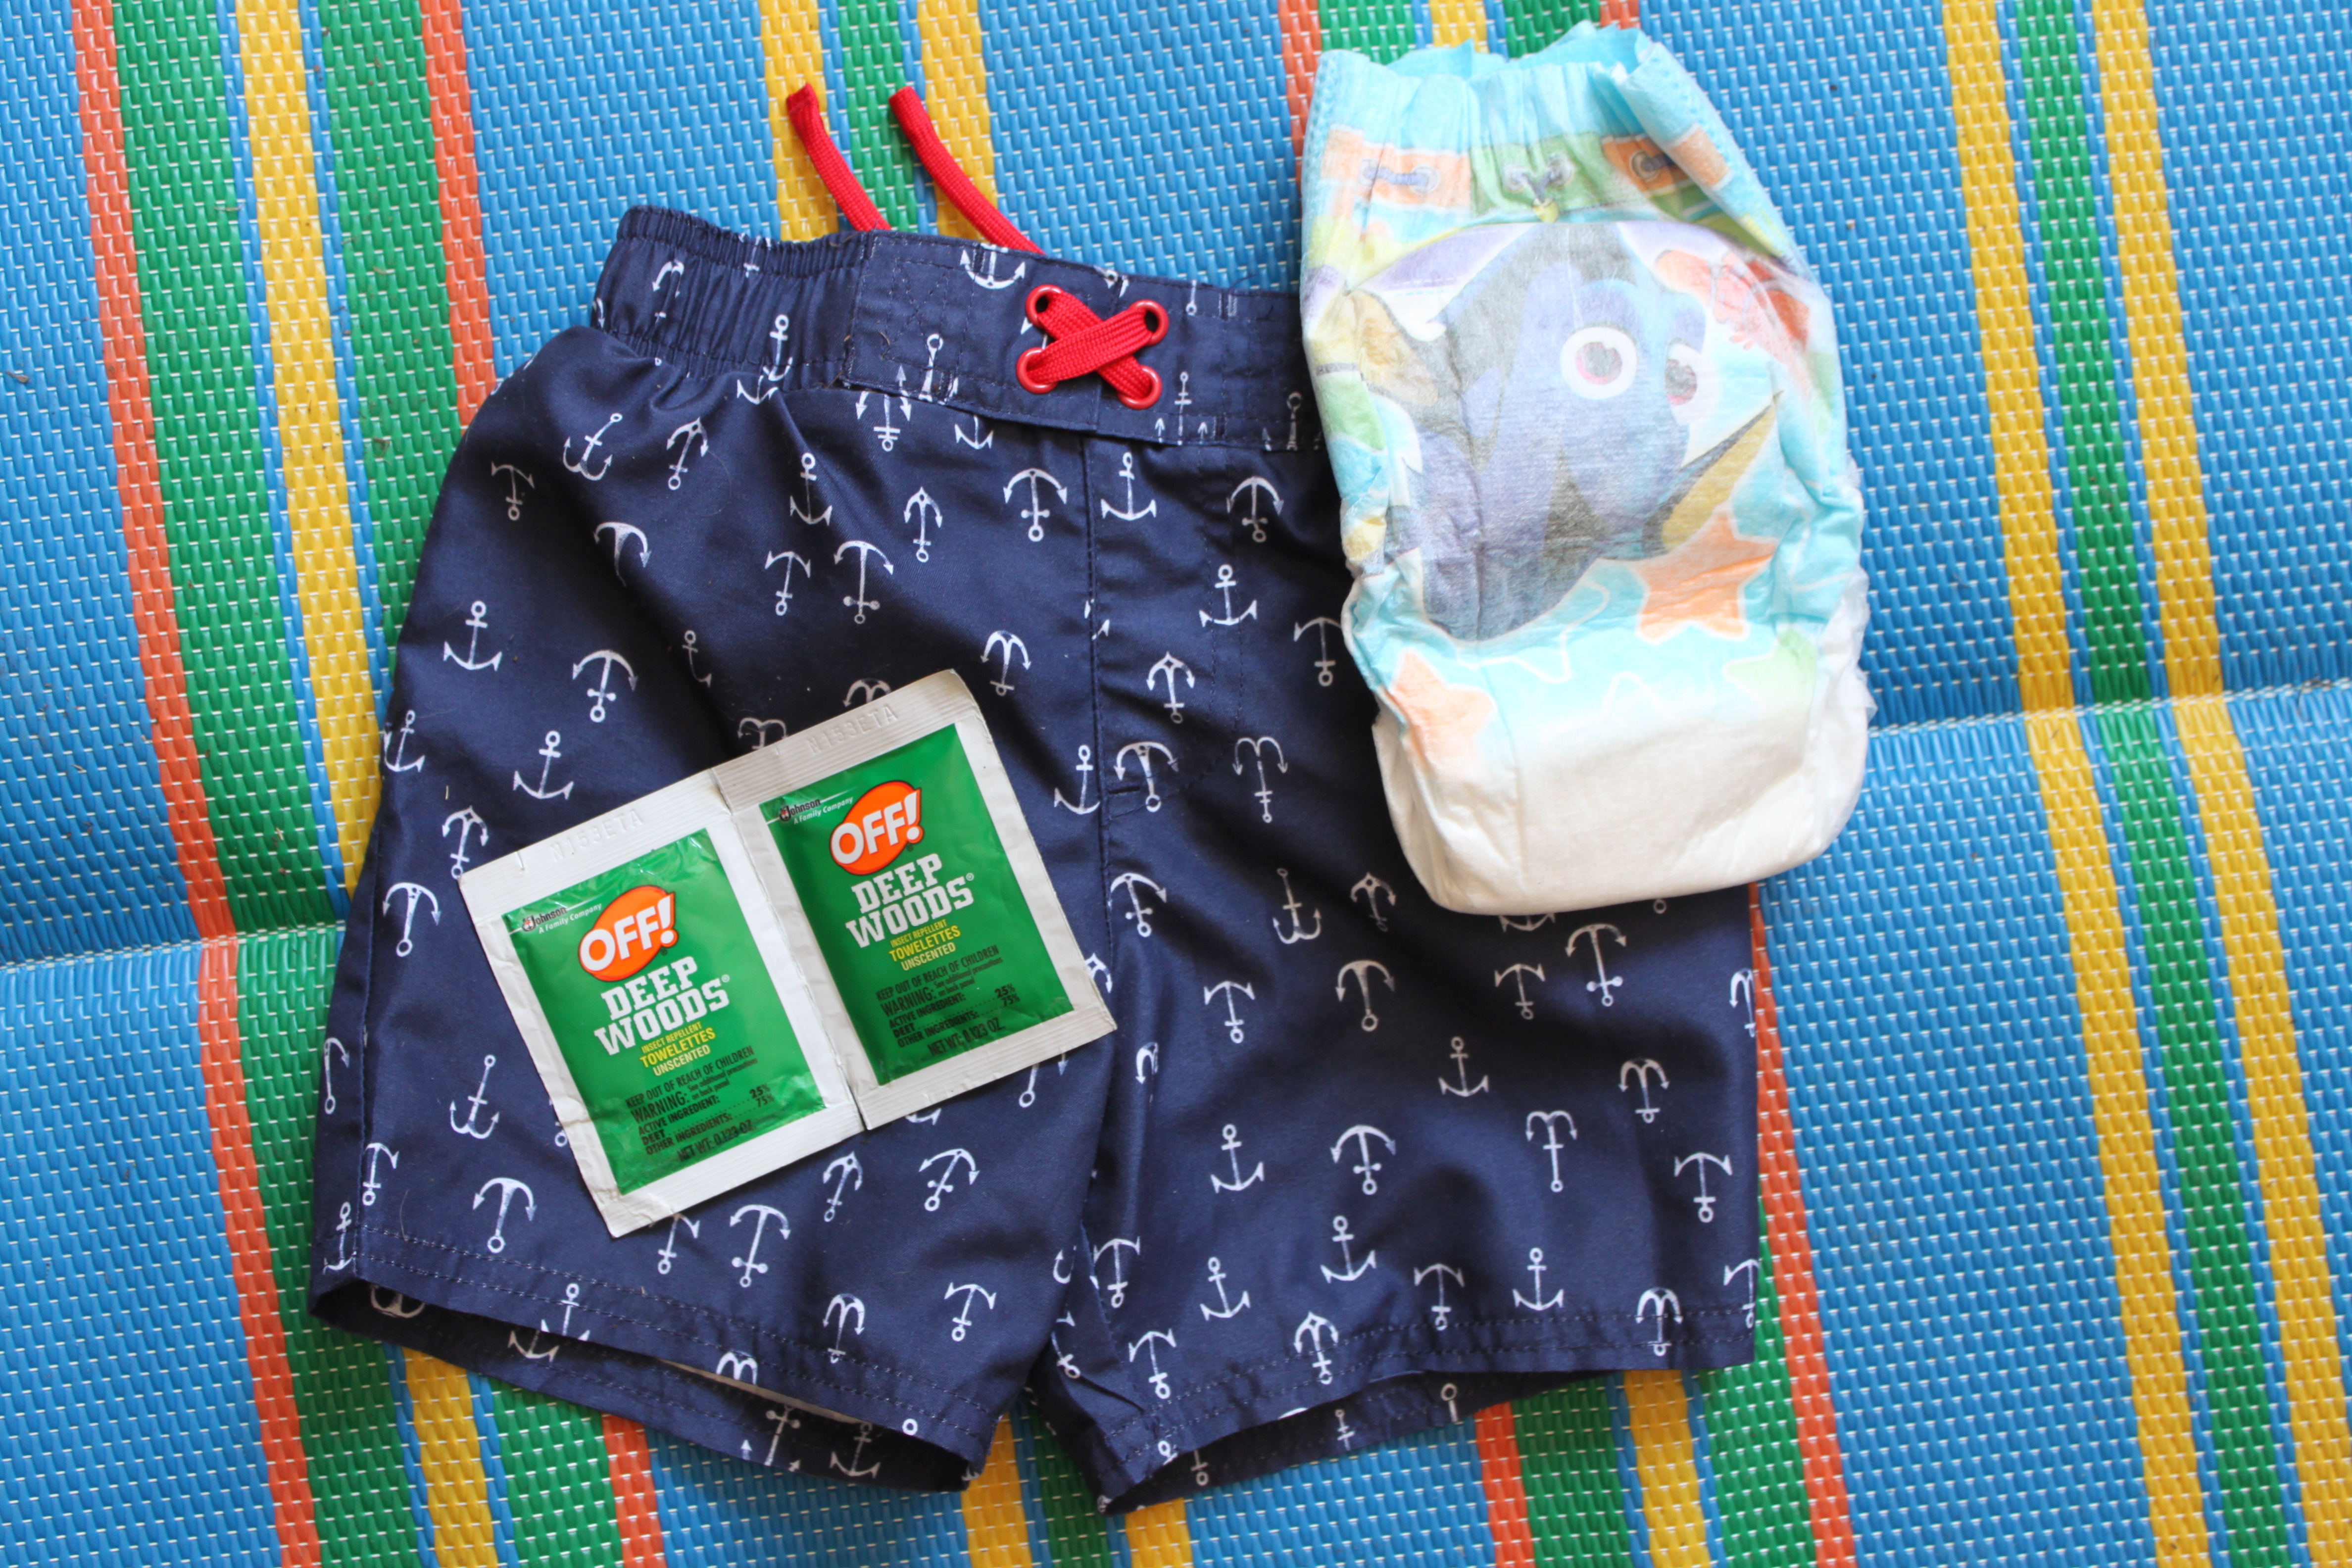 summer essentials for mom and toddler for parks, beach, and pool. Sunscreen, skin and hair products. Swim diapers and OFF bug spray wipes